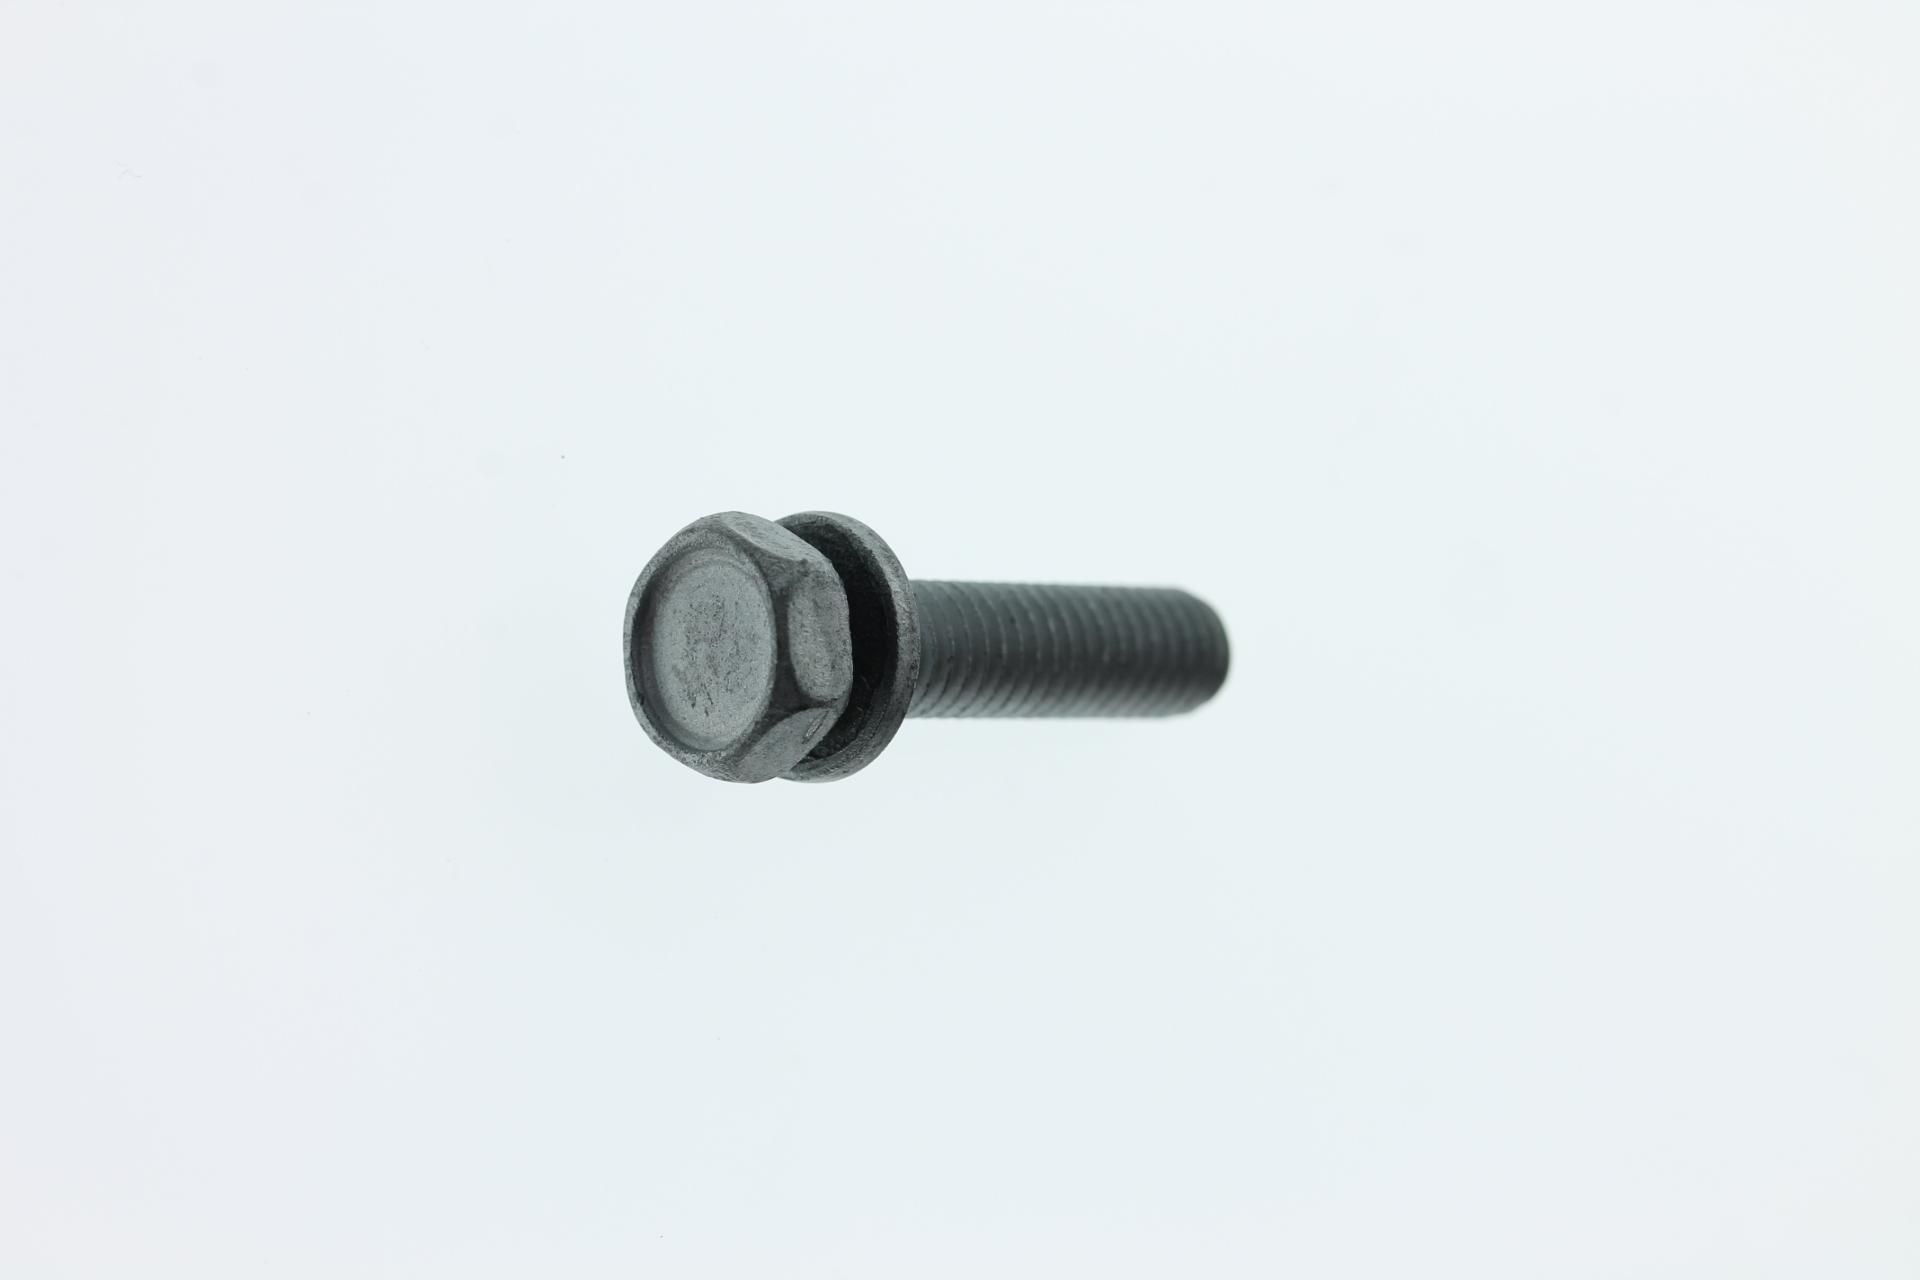 90119-06891-00 BOLT, WITH WASHER